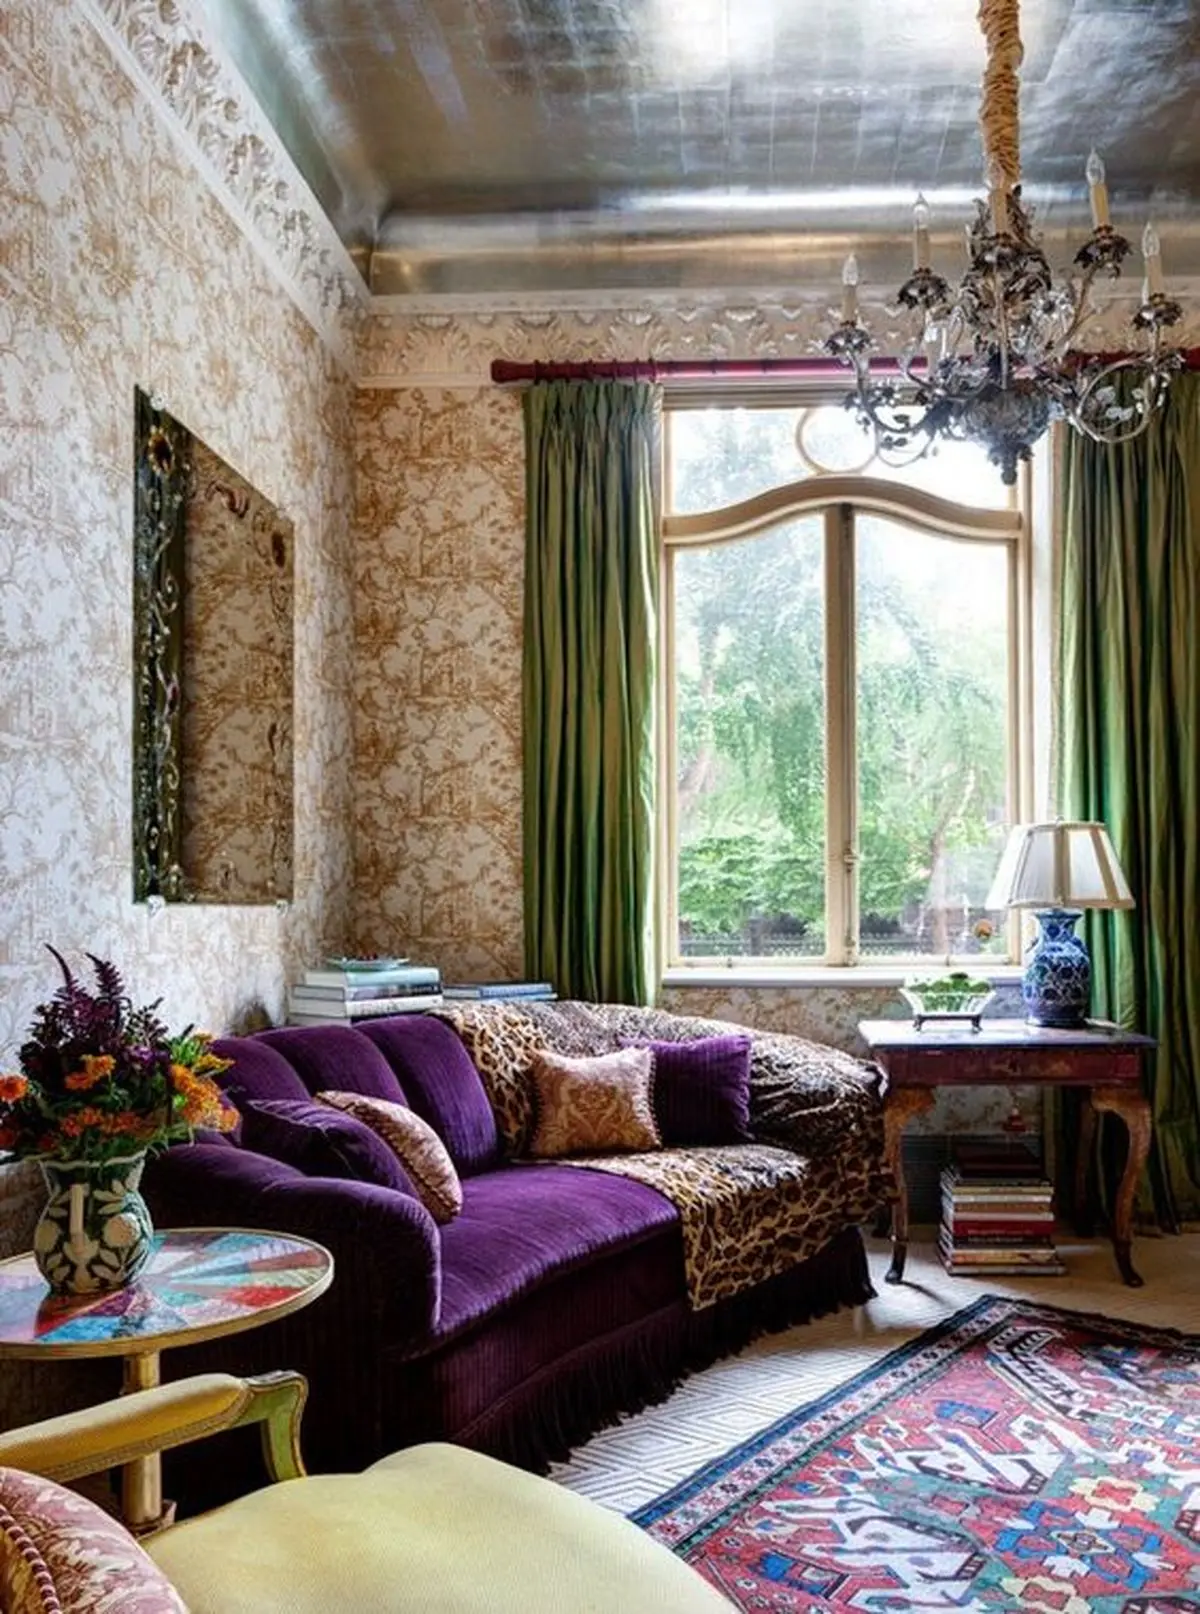 08-a-sophisticated-vintage-living-room-with-printed-wallpaper-a-purple-sofa-a-lovely-chandelier-green-curtais-and-a-printed-rug